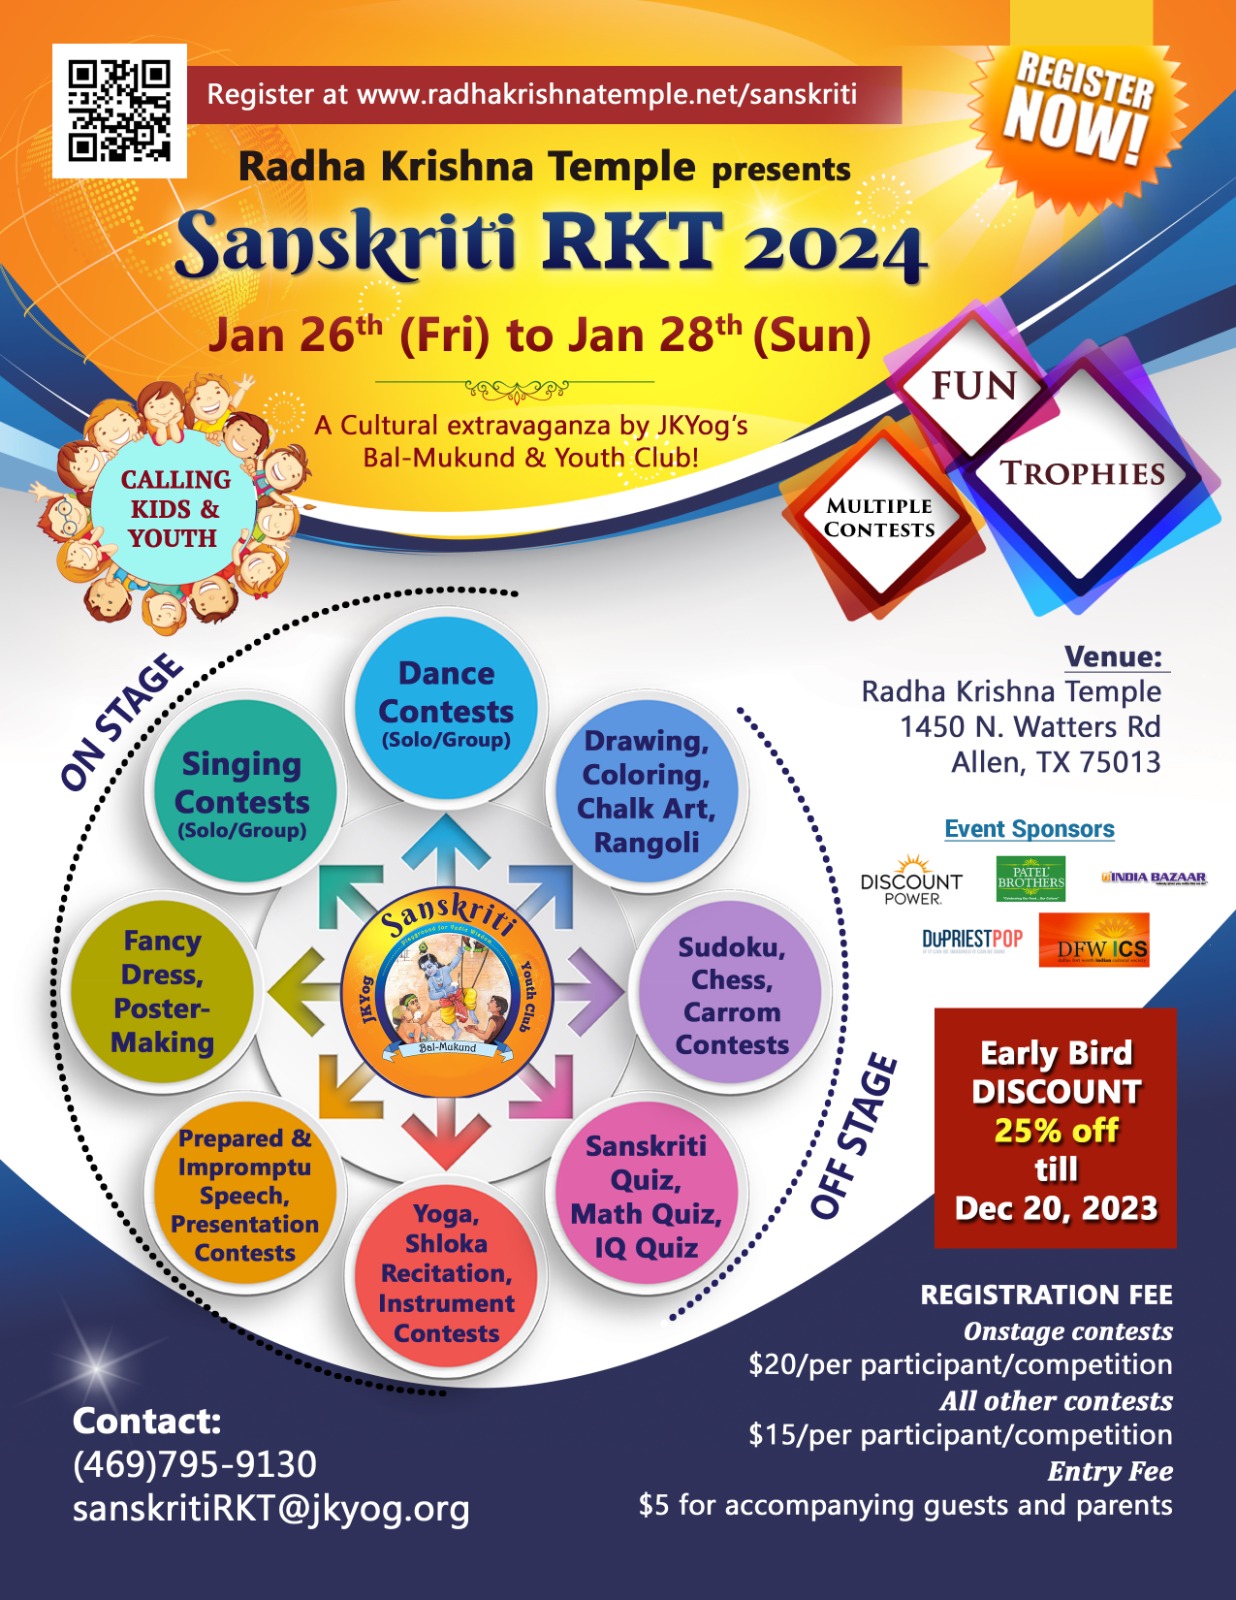 Sanskriti Contests for Children & Youth